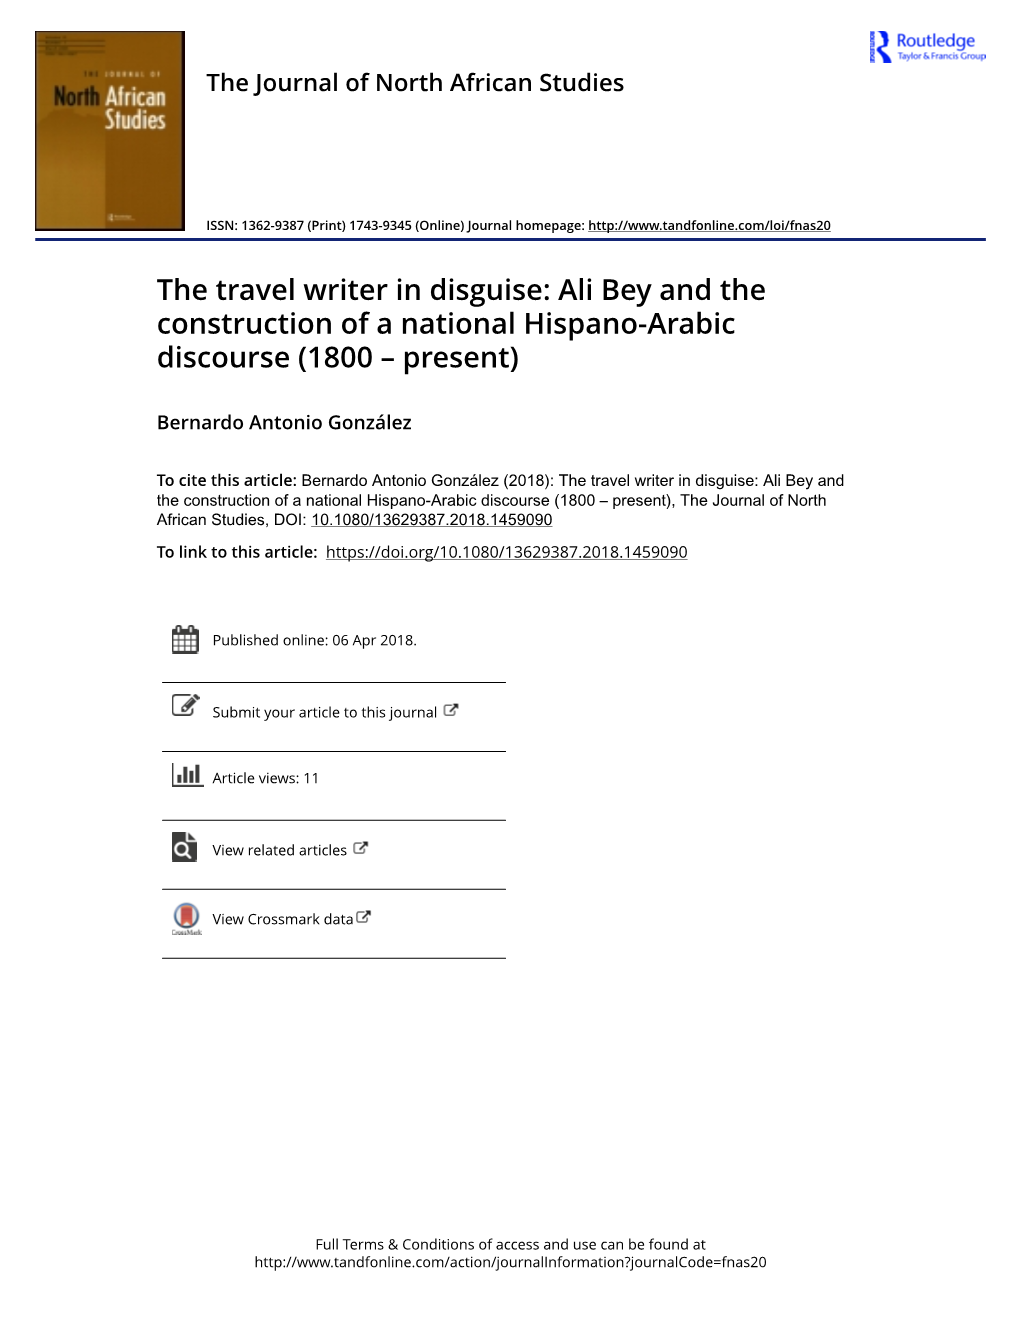 The Travel Writer in Disguise: Ali Bey and the Construction of a National Hispano-Arabic Discourse (1800 – Present)